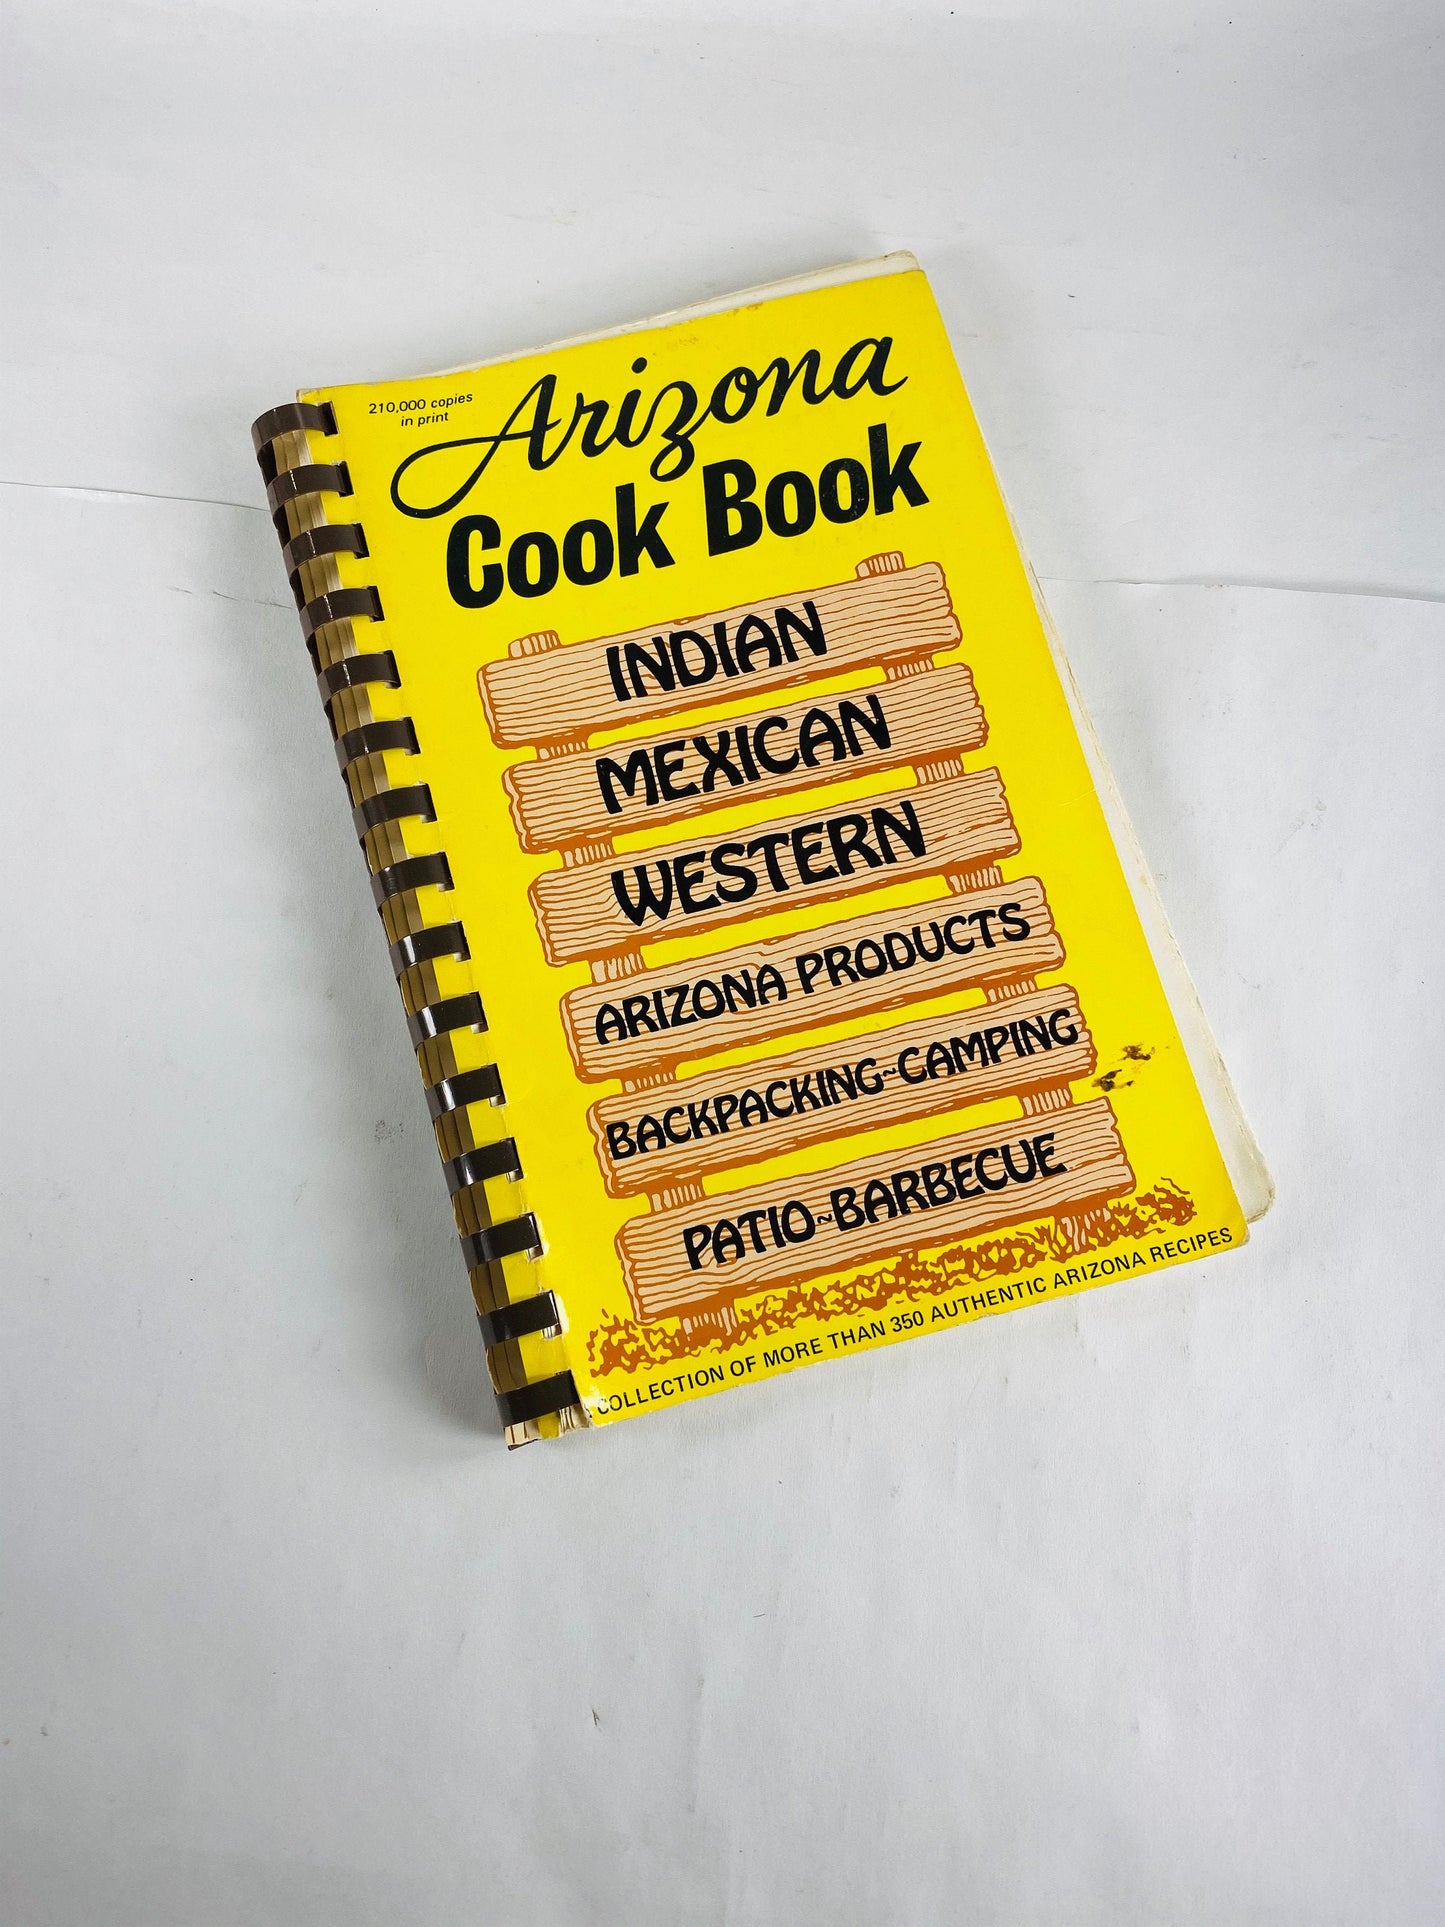 Arizona Cook Book Backpacking Camping Patio Barbecue vintage cookbook circa 1983 by Al Fischer. Indian Mexican Western